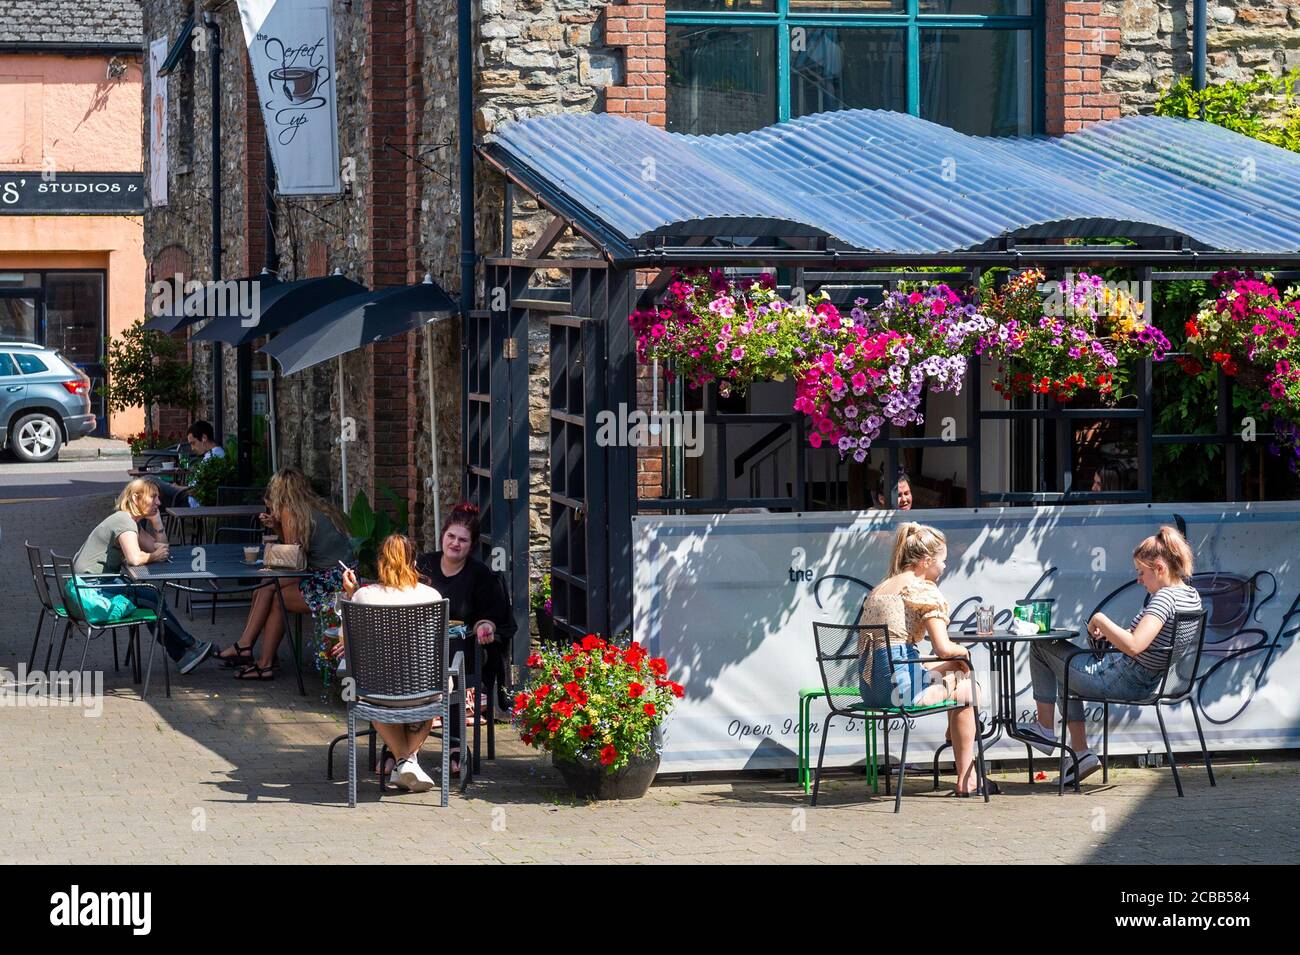 Bandon, West Cork, Ireland. 12th Aug, 2020. Outdoor seating at cafés is becoming the new normal with the COVID-19 pandemic upon us. People eat and drink outside a café in Bandon this afternoon. Credit: AG News/Alamy Live News Stock Photo